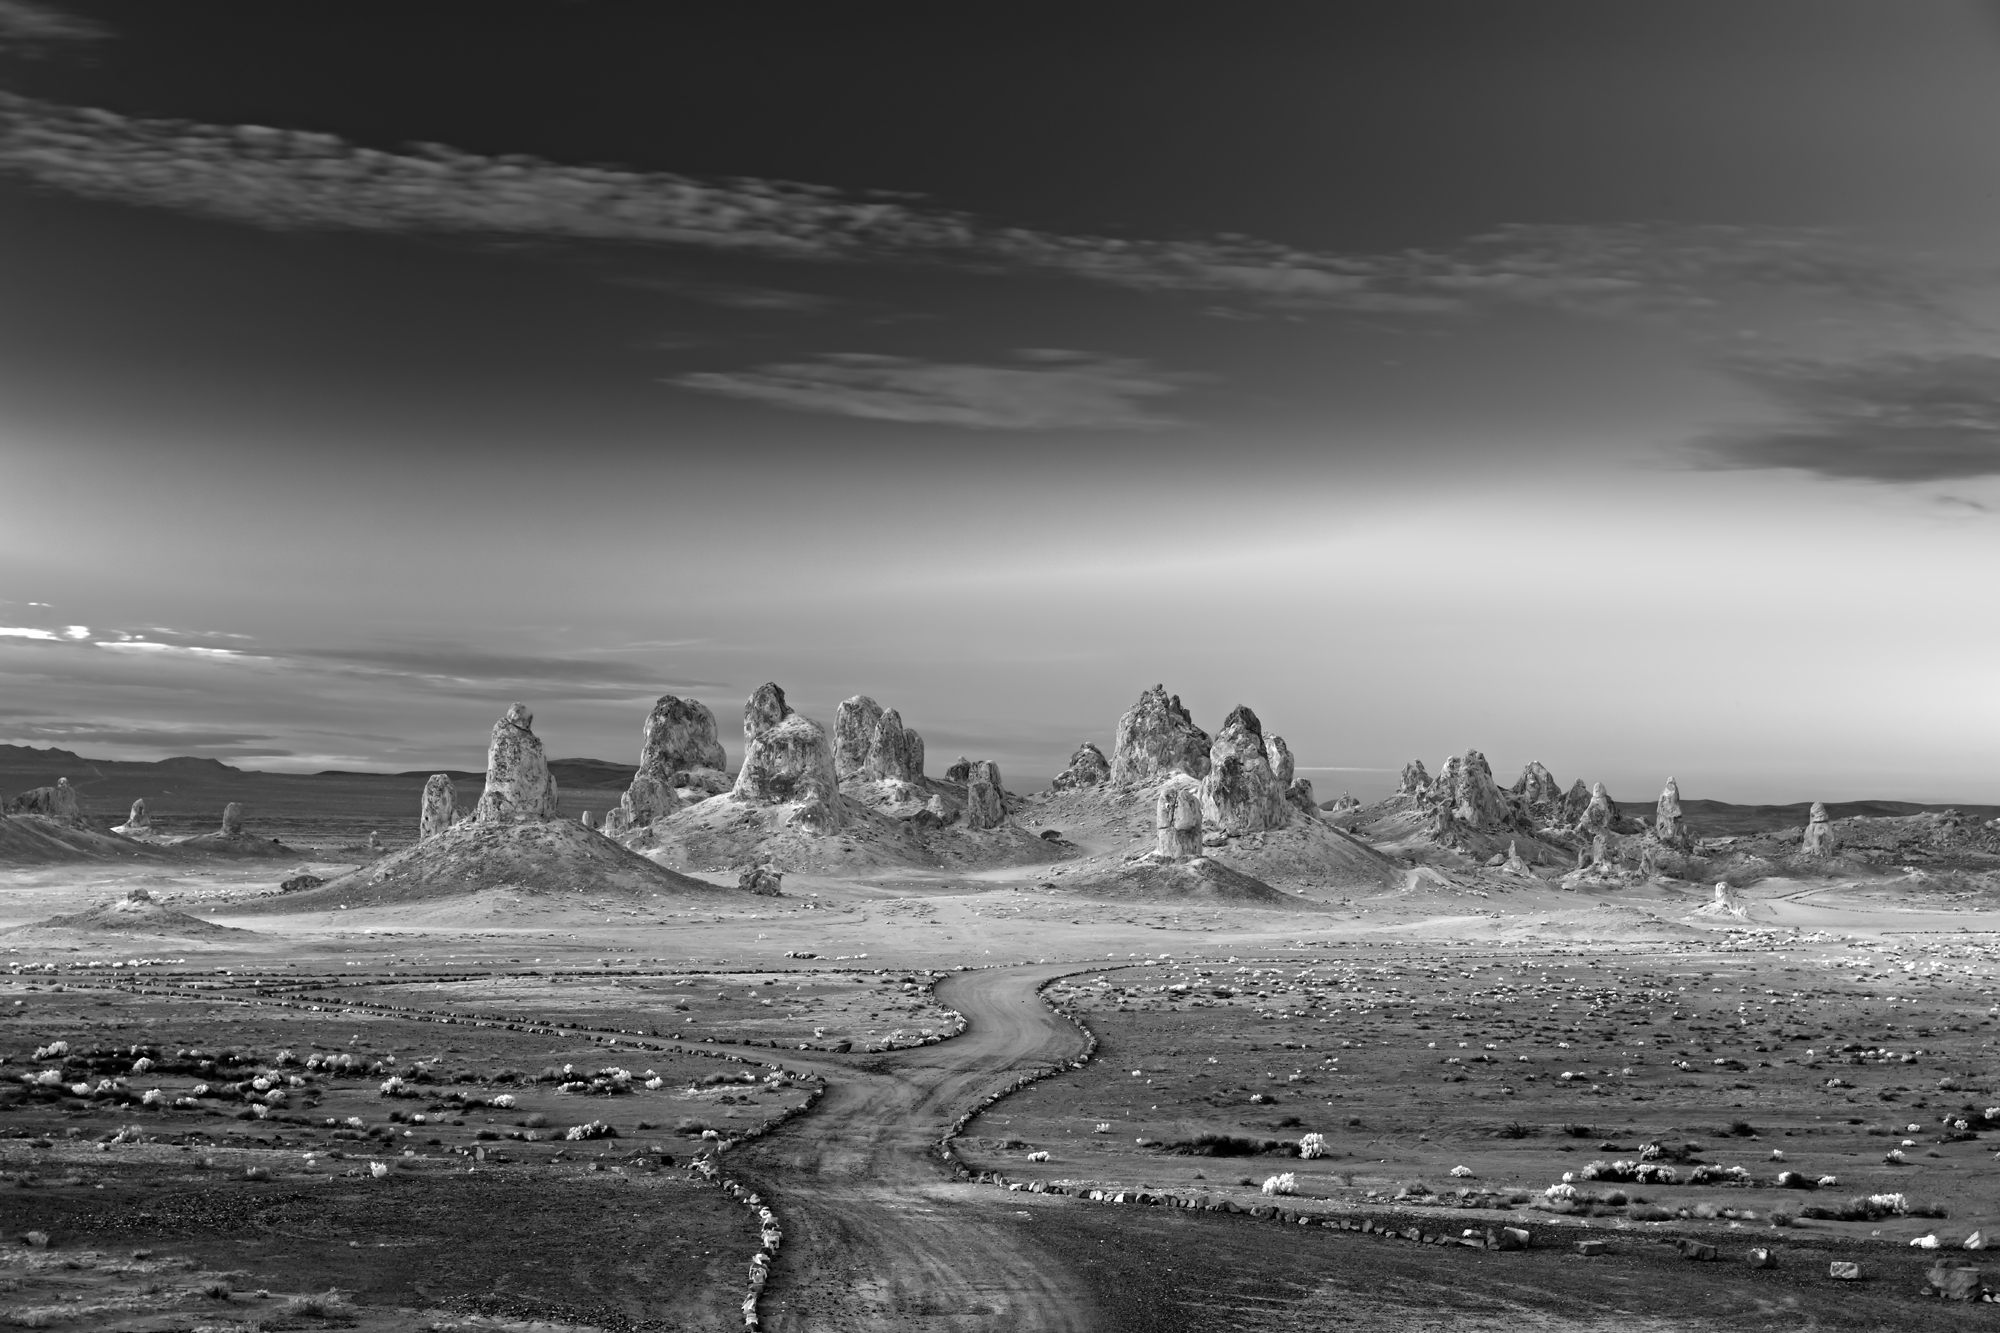 Mitch Dobrowner, Natron Sunrise, Catherine Couturier Gallery